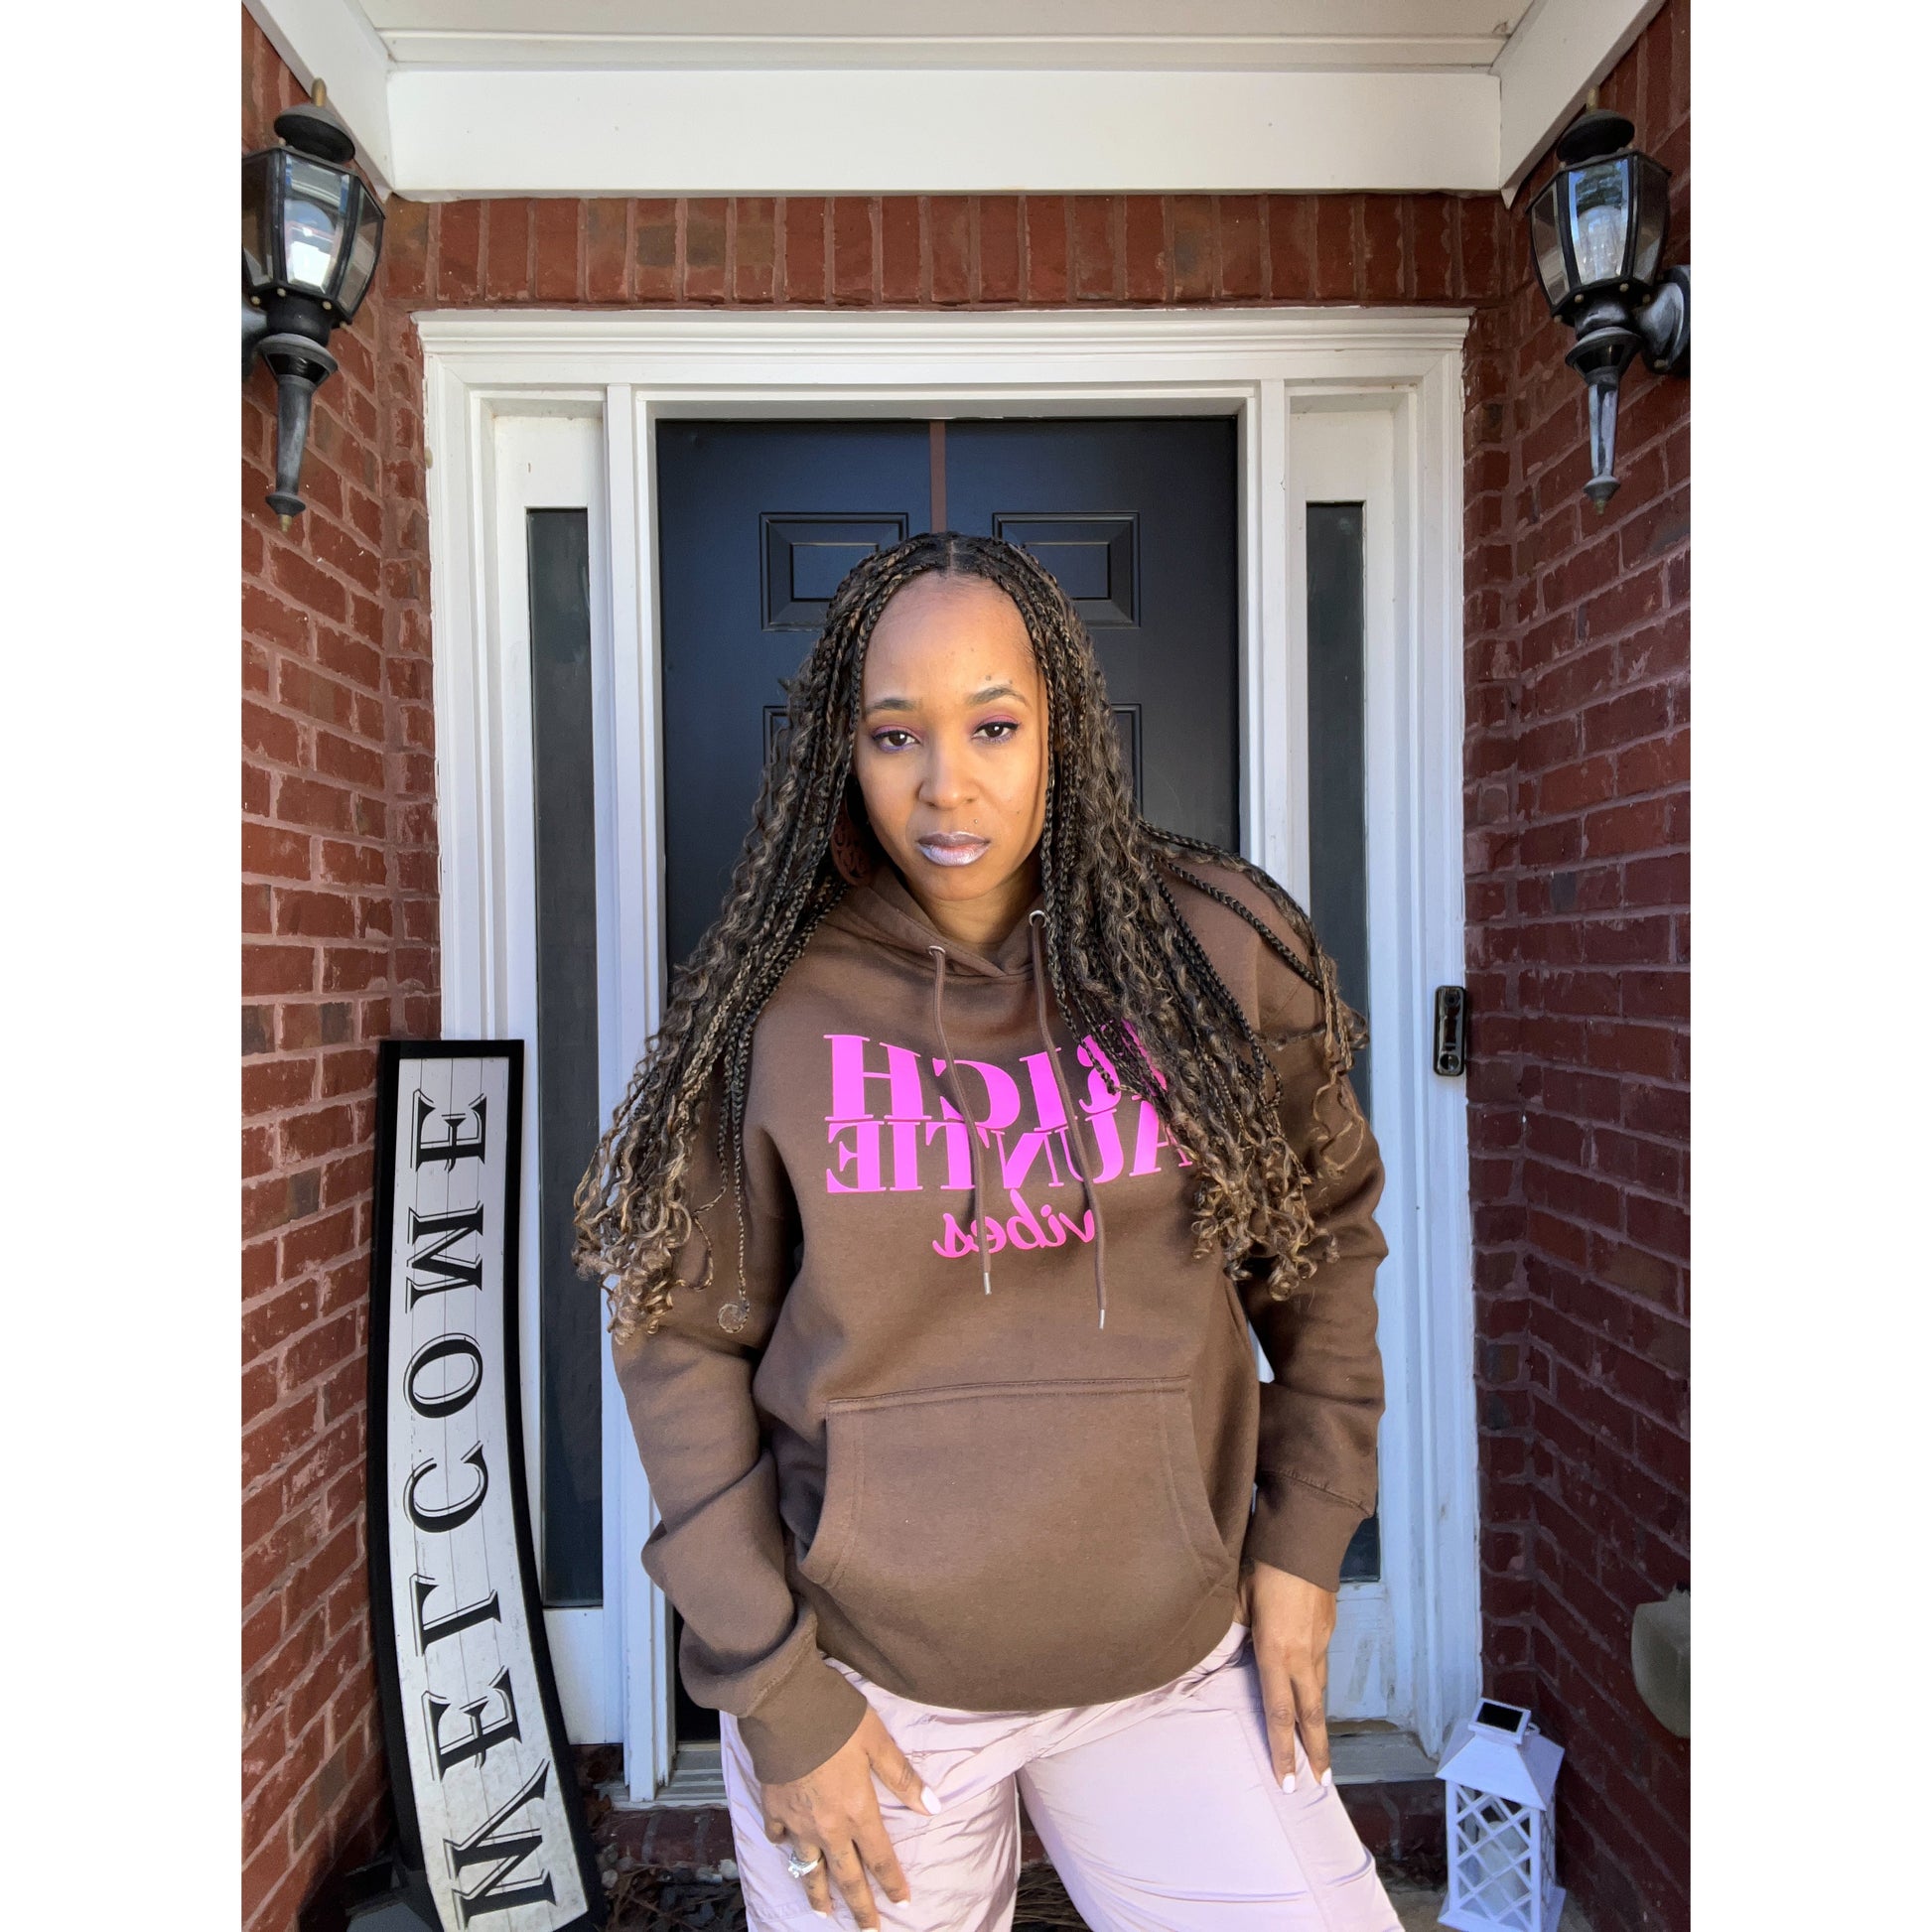 Rich Auntie Vibes Sweatshirt in Brown and Pink